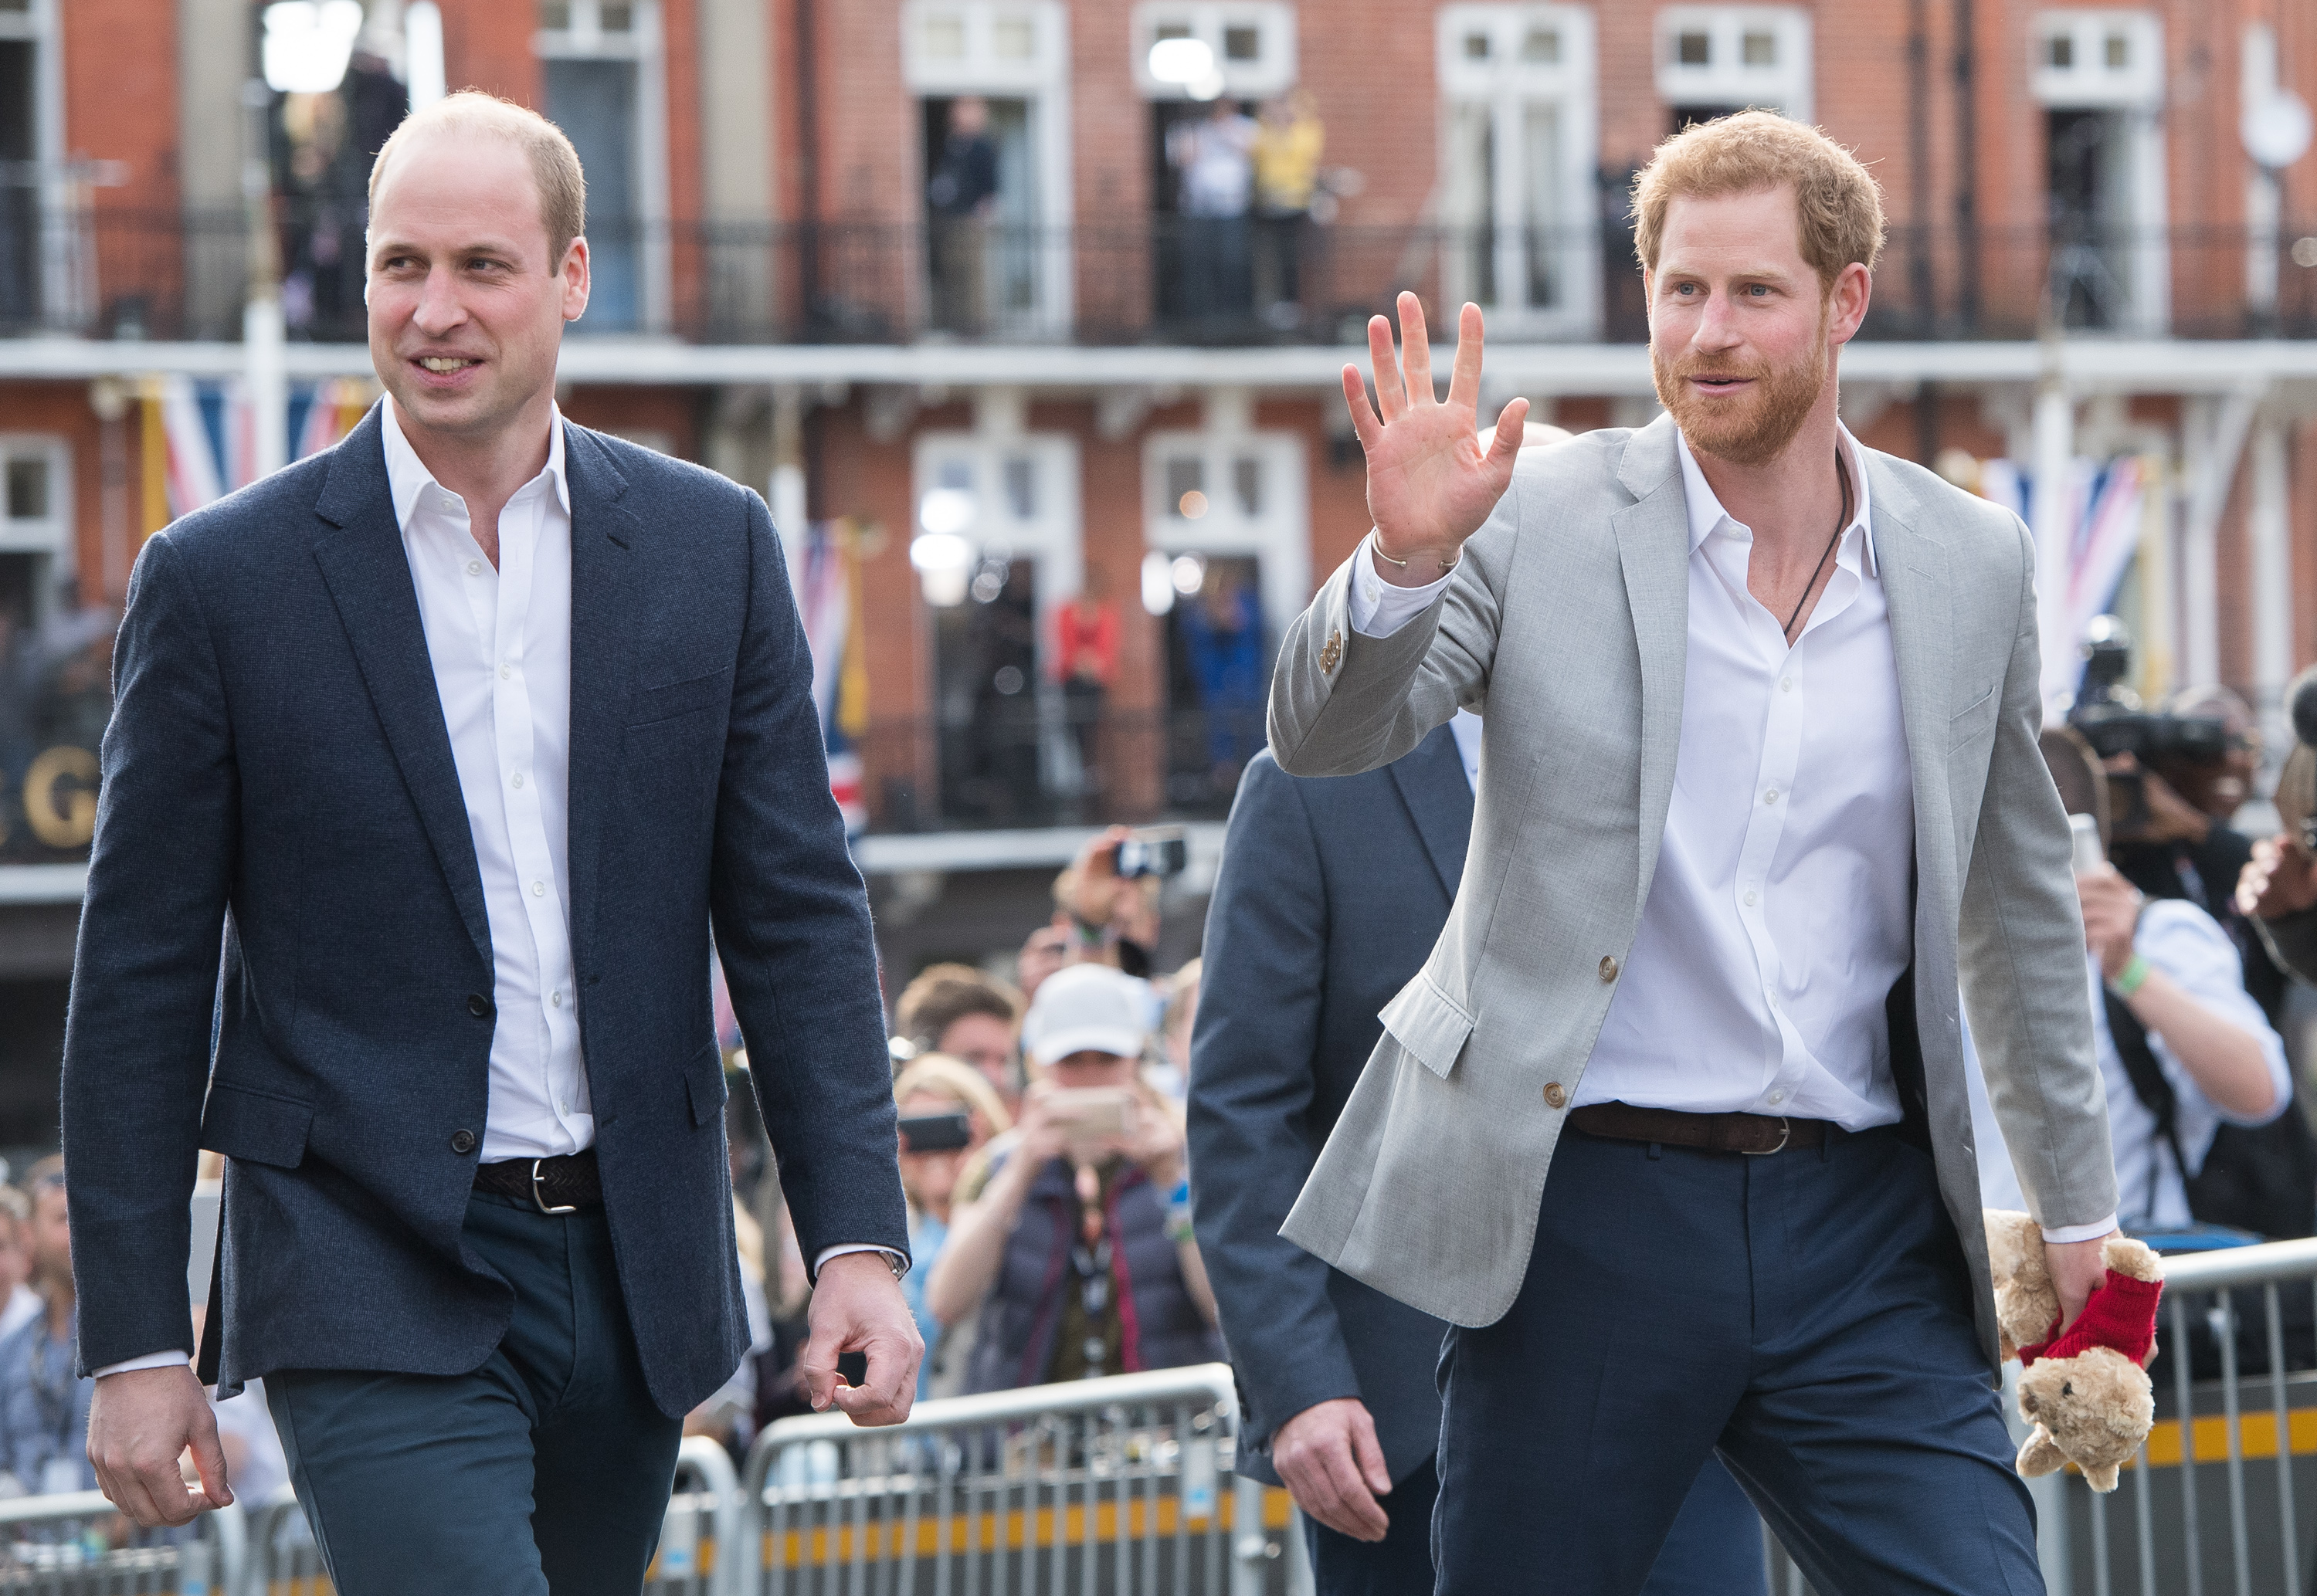 Prince Harry and Prince William meeting the public in Windsor on the eve of Harry's wedding